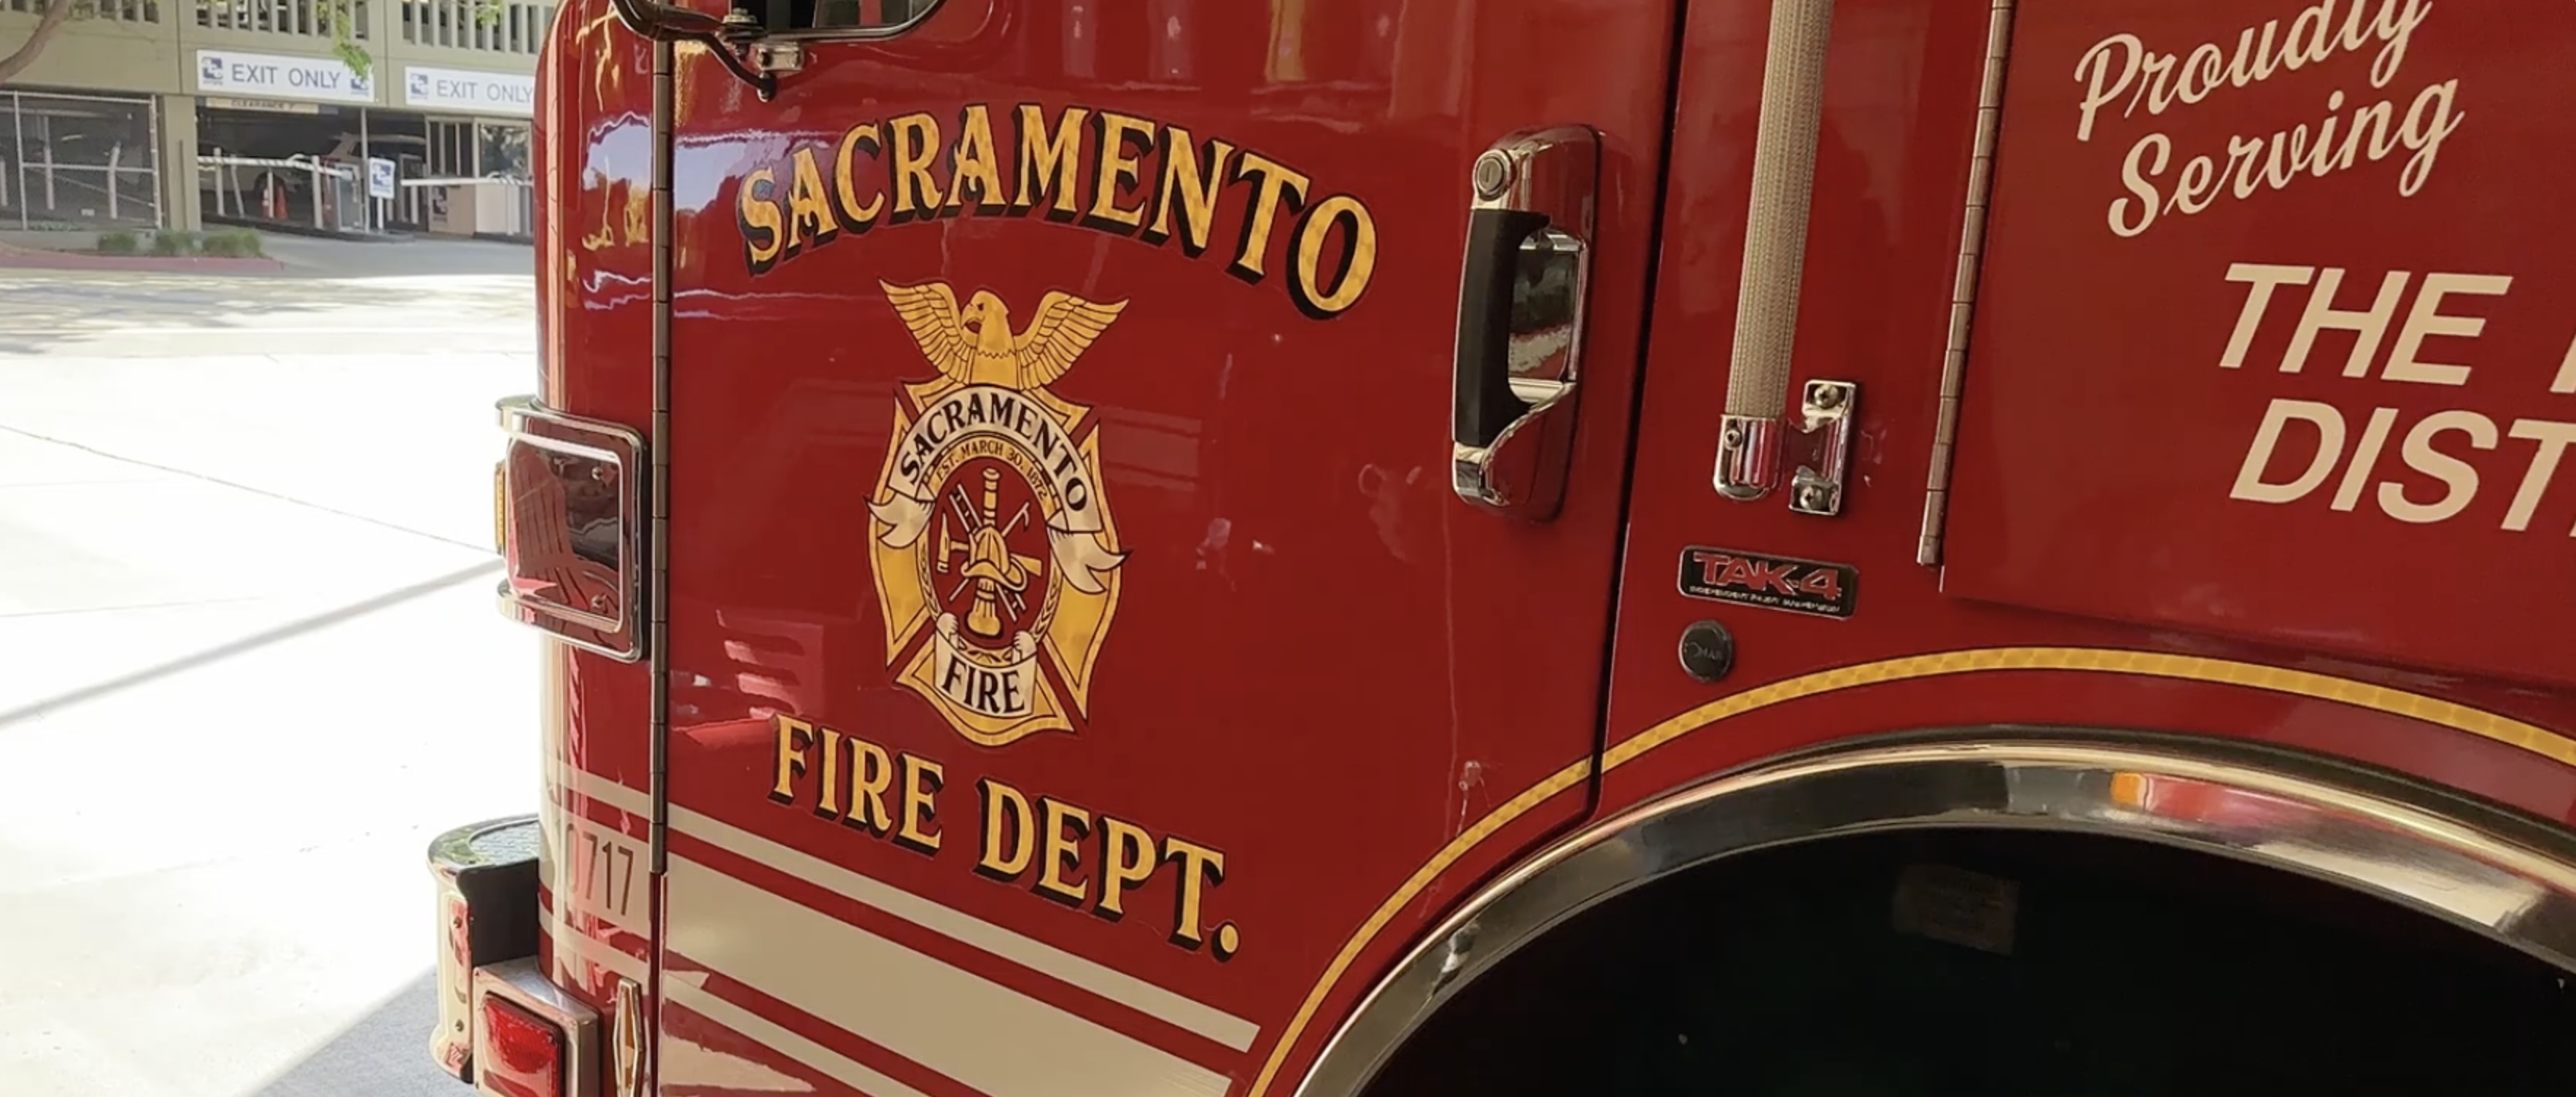 City of Sacramento, CA Fire Department Improves Visibility and Resource Management